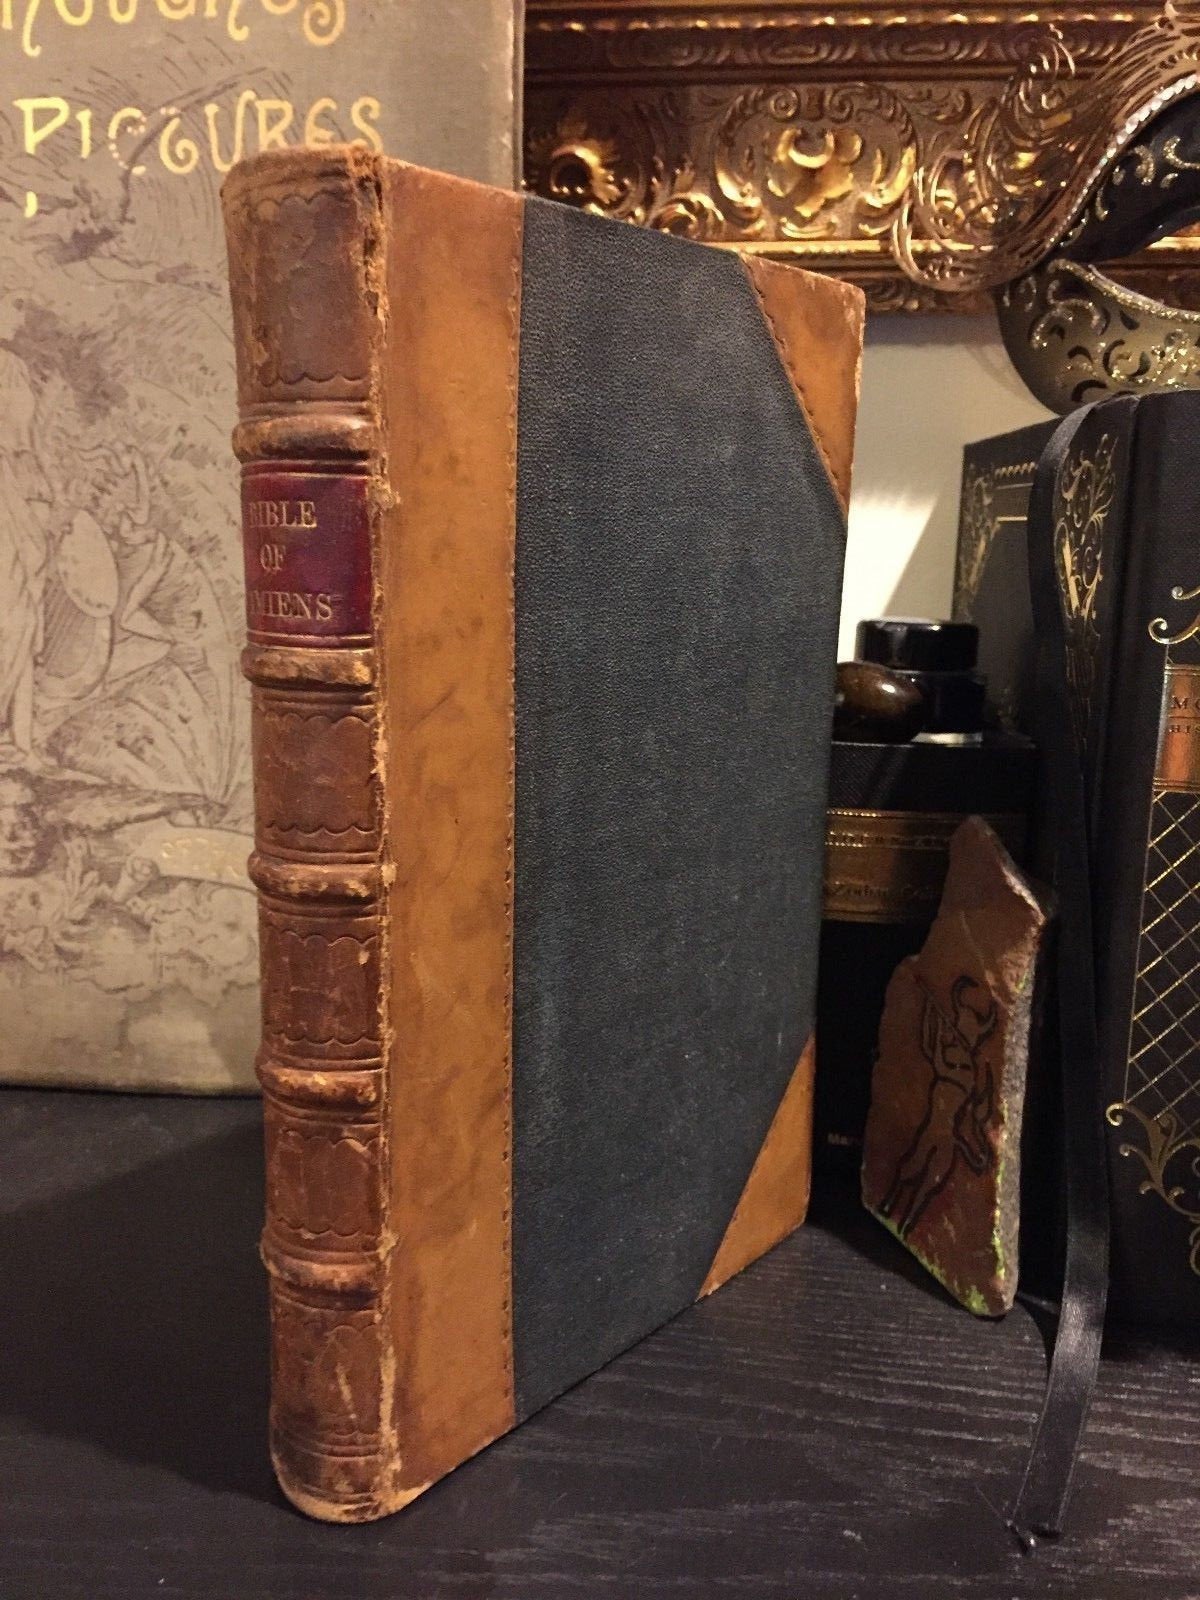 Our Fathers Have Told Us. Part I. The Bible of Amiens, John Ruskin, 1884, 1st Ed